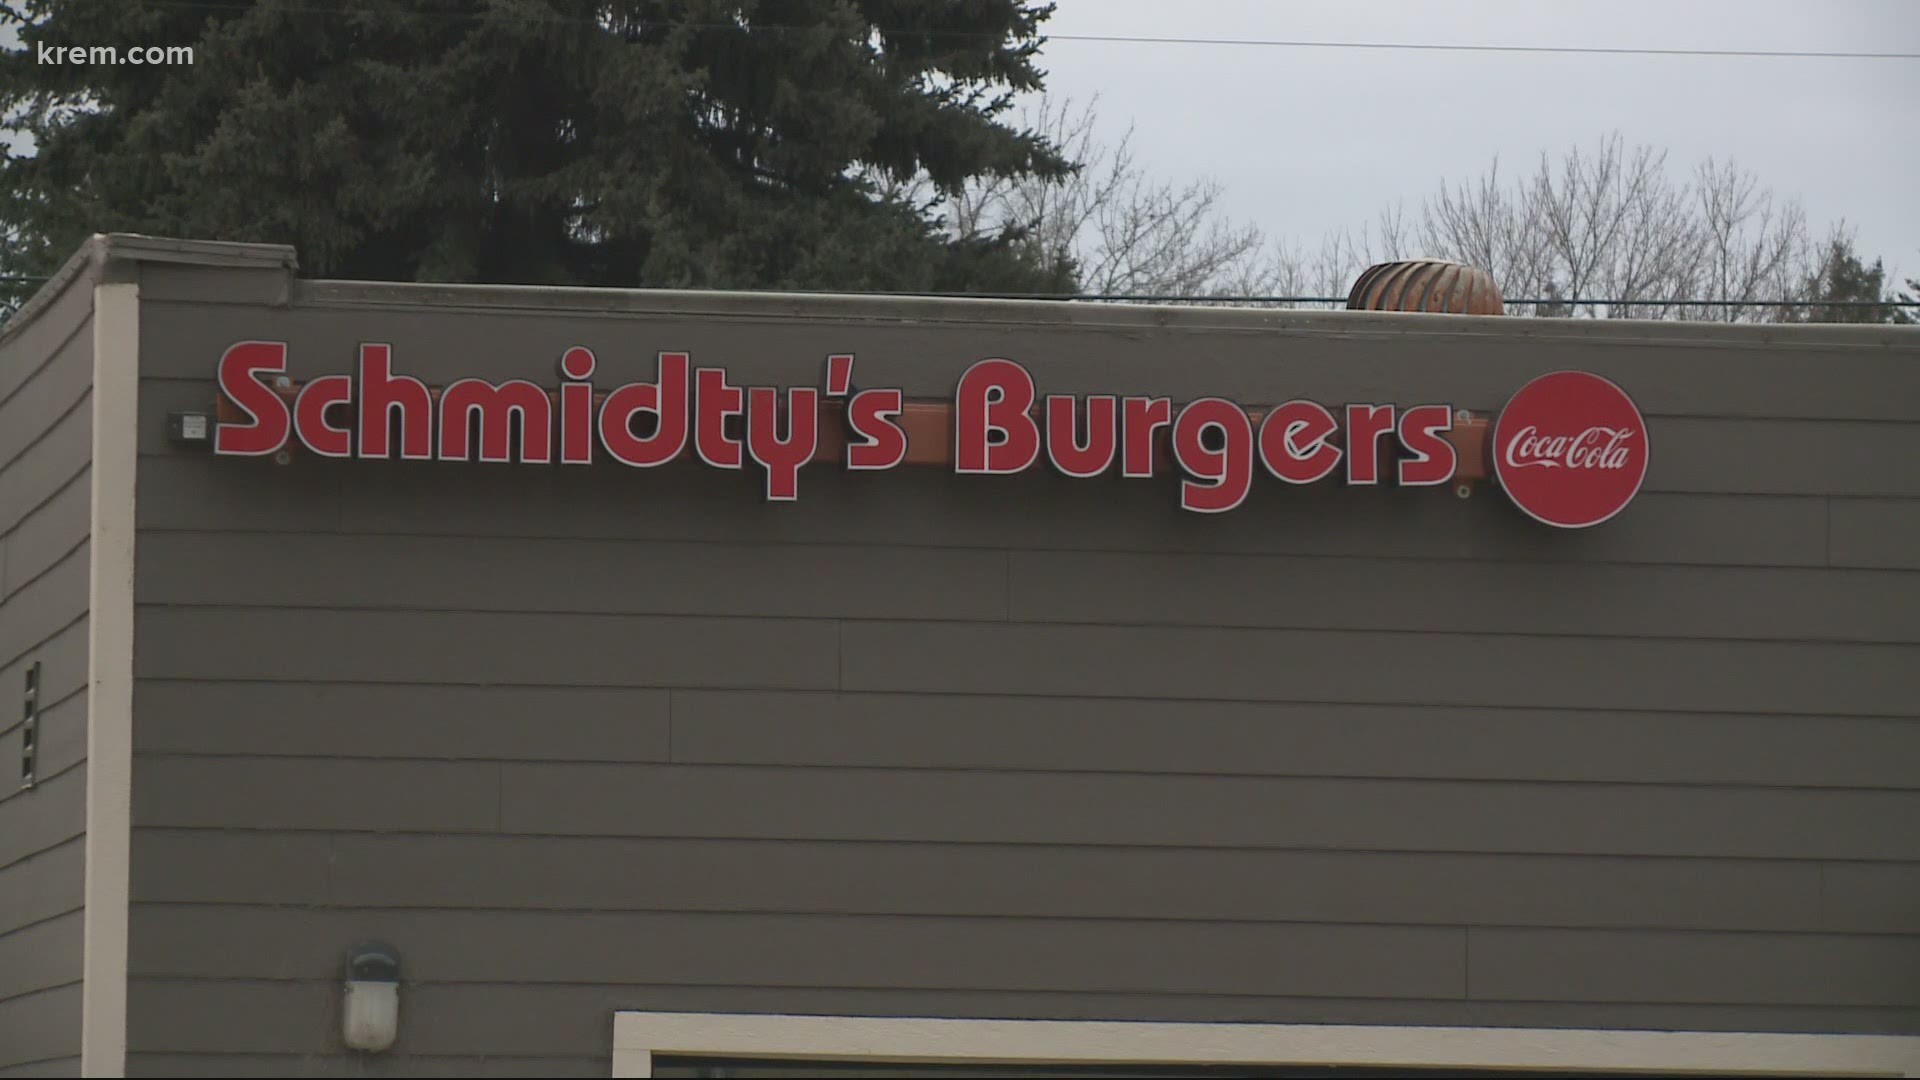 The owners of Schmidty’s Burgers hoped they would be reopened by now, but COVID-19 protocols have held up the renovation of their new restaurant.